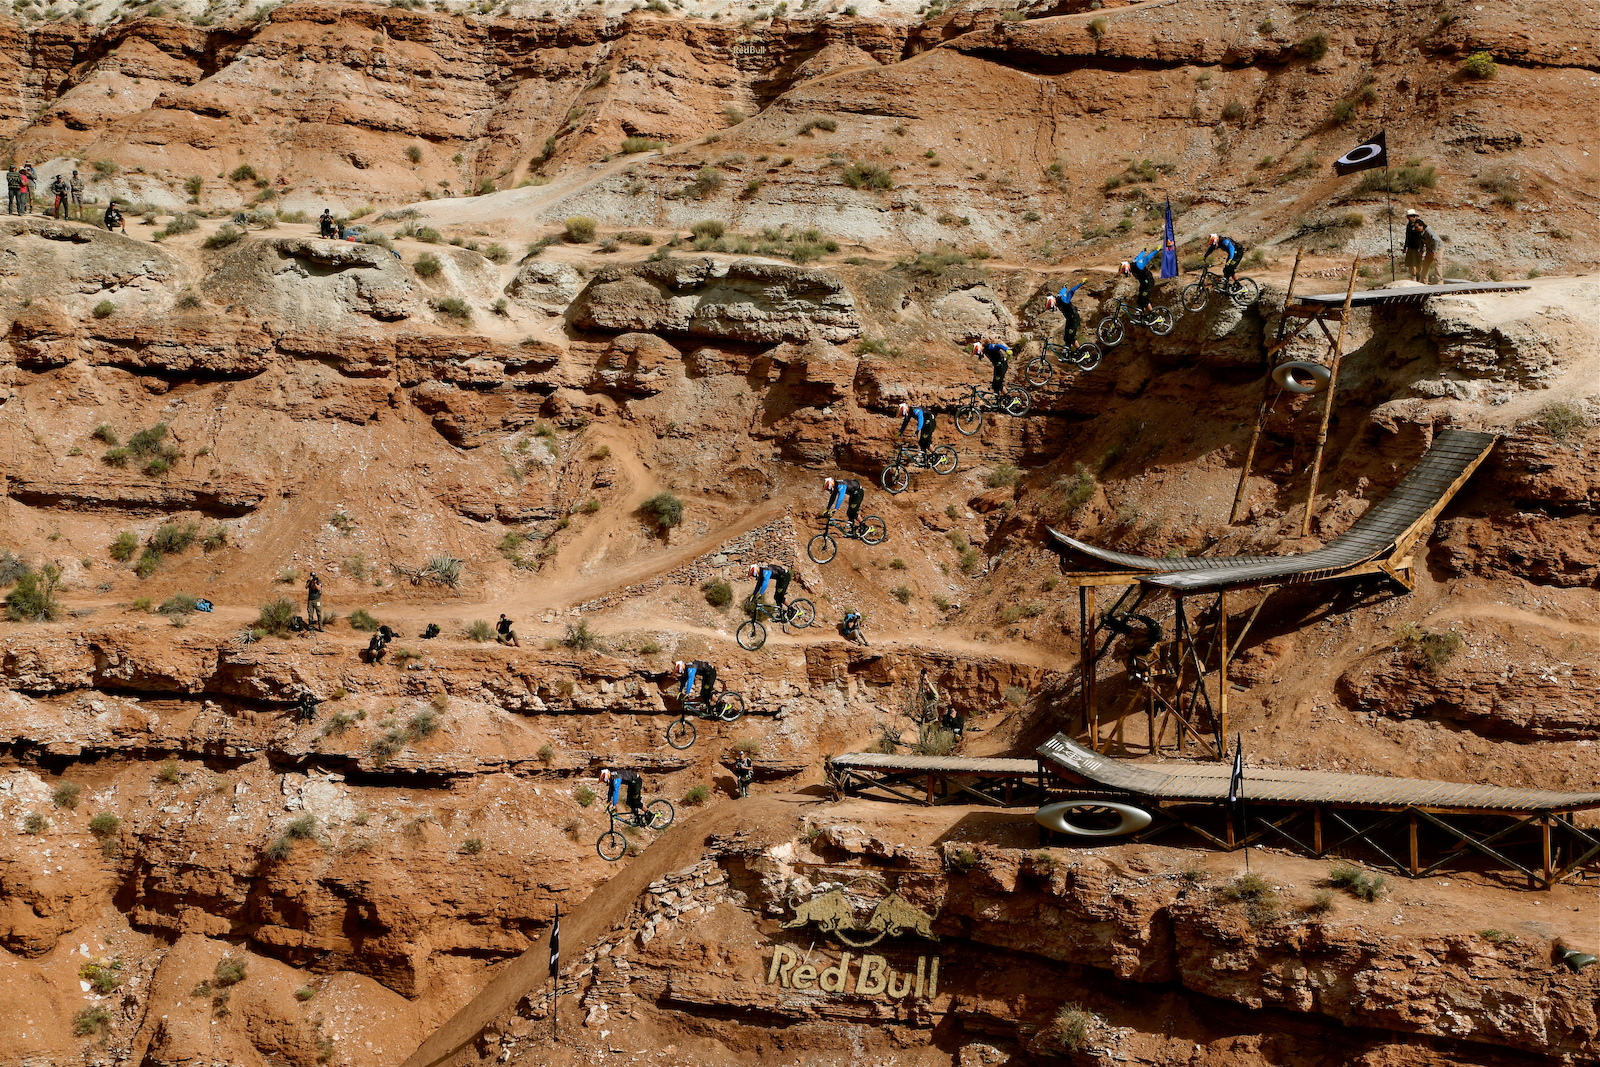 Kyle Strait wins Rampage 2013 with this huge no-hander from Oakley Sender